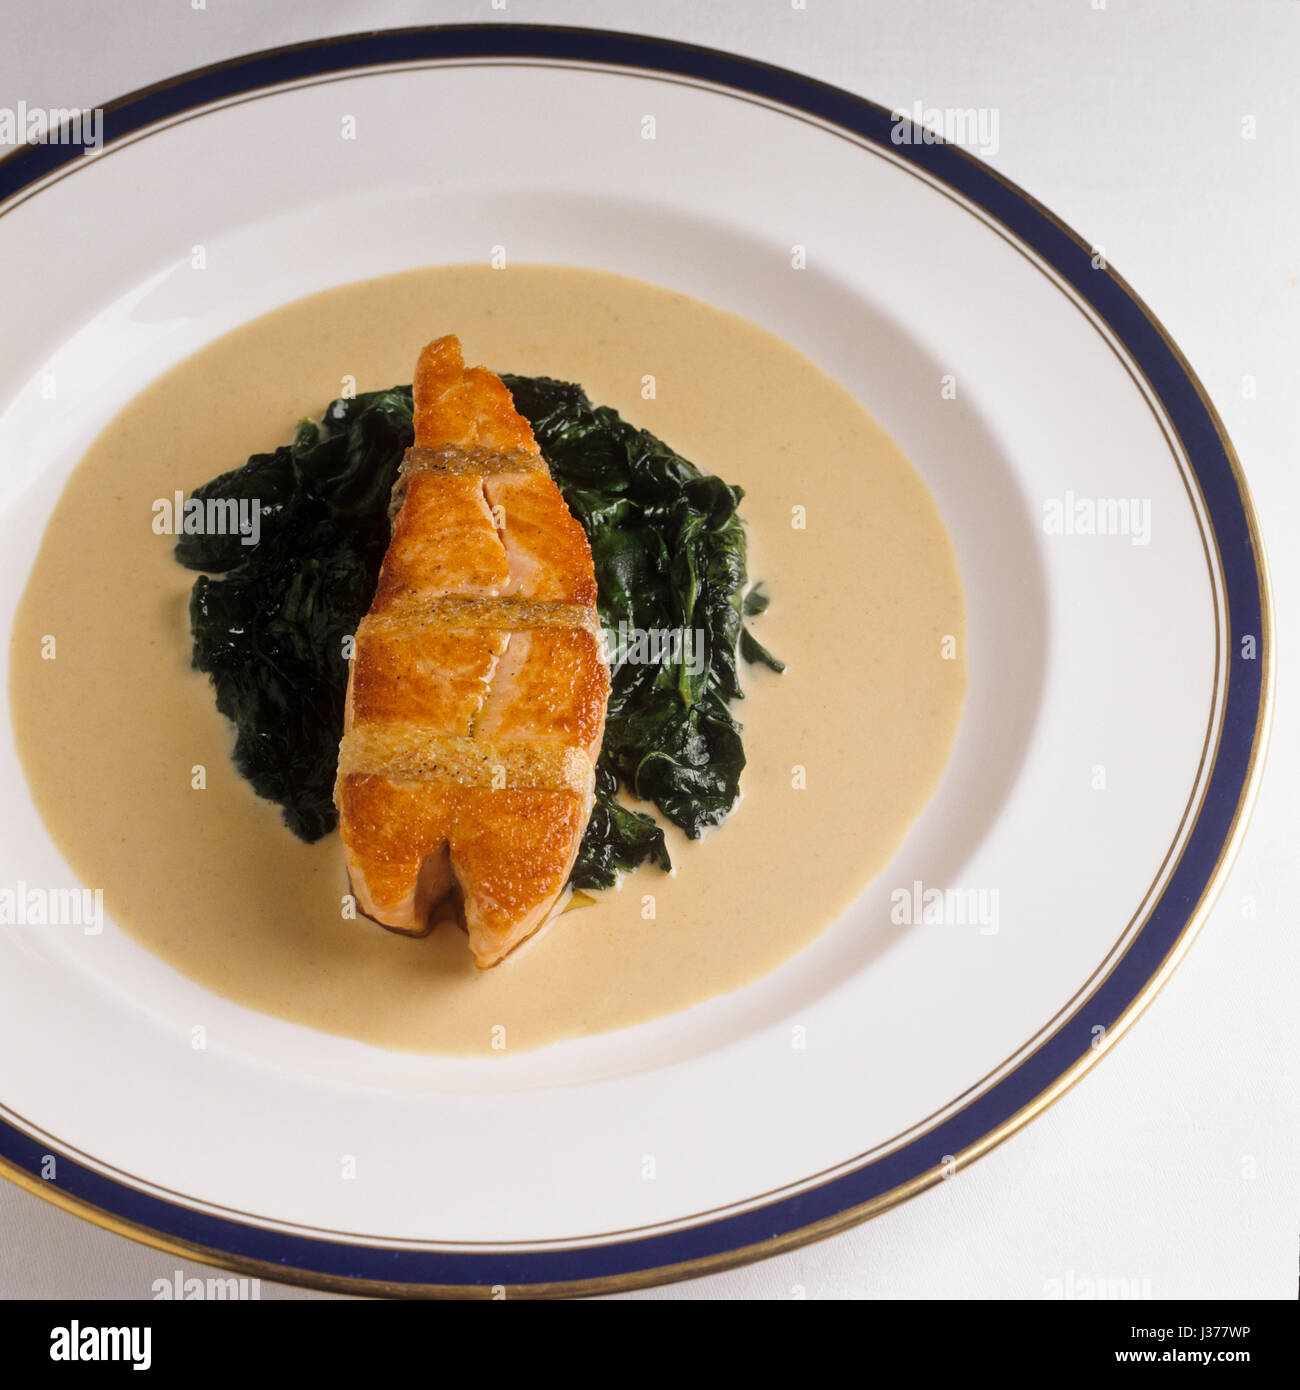 Dish with salmon and spinach. Stock Photo